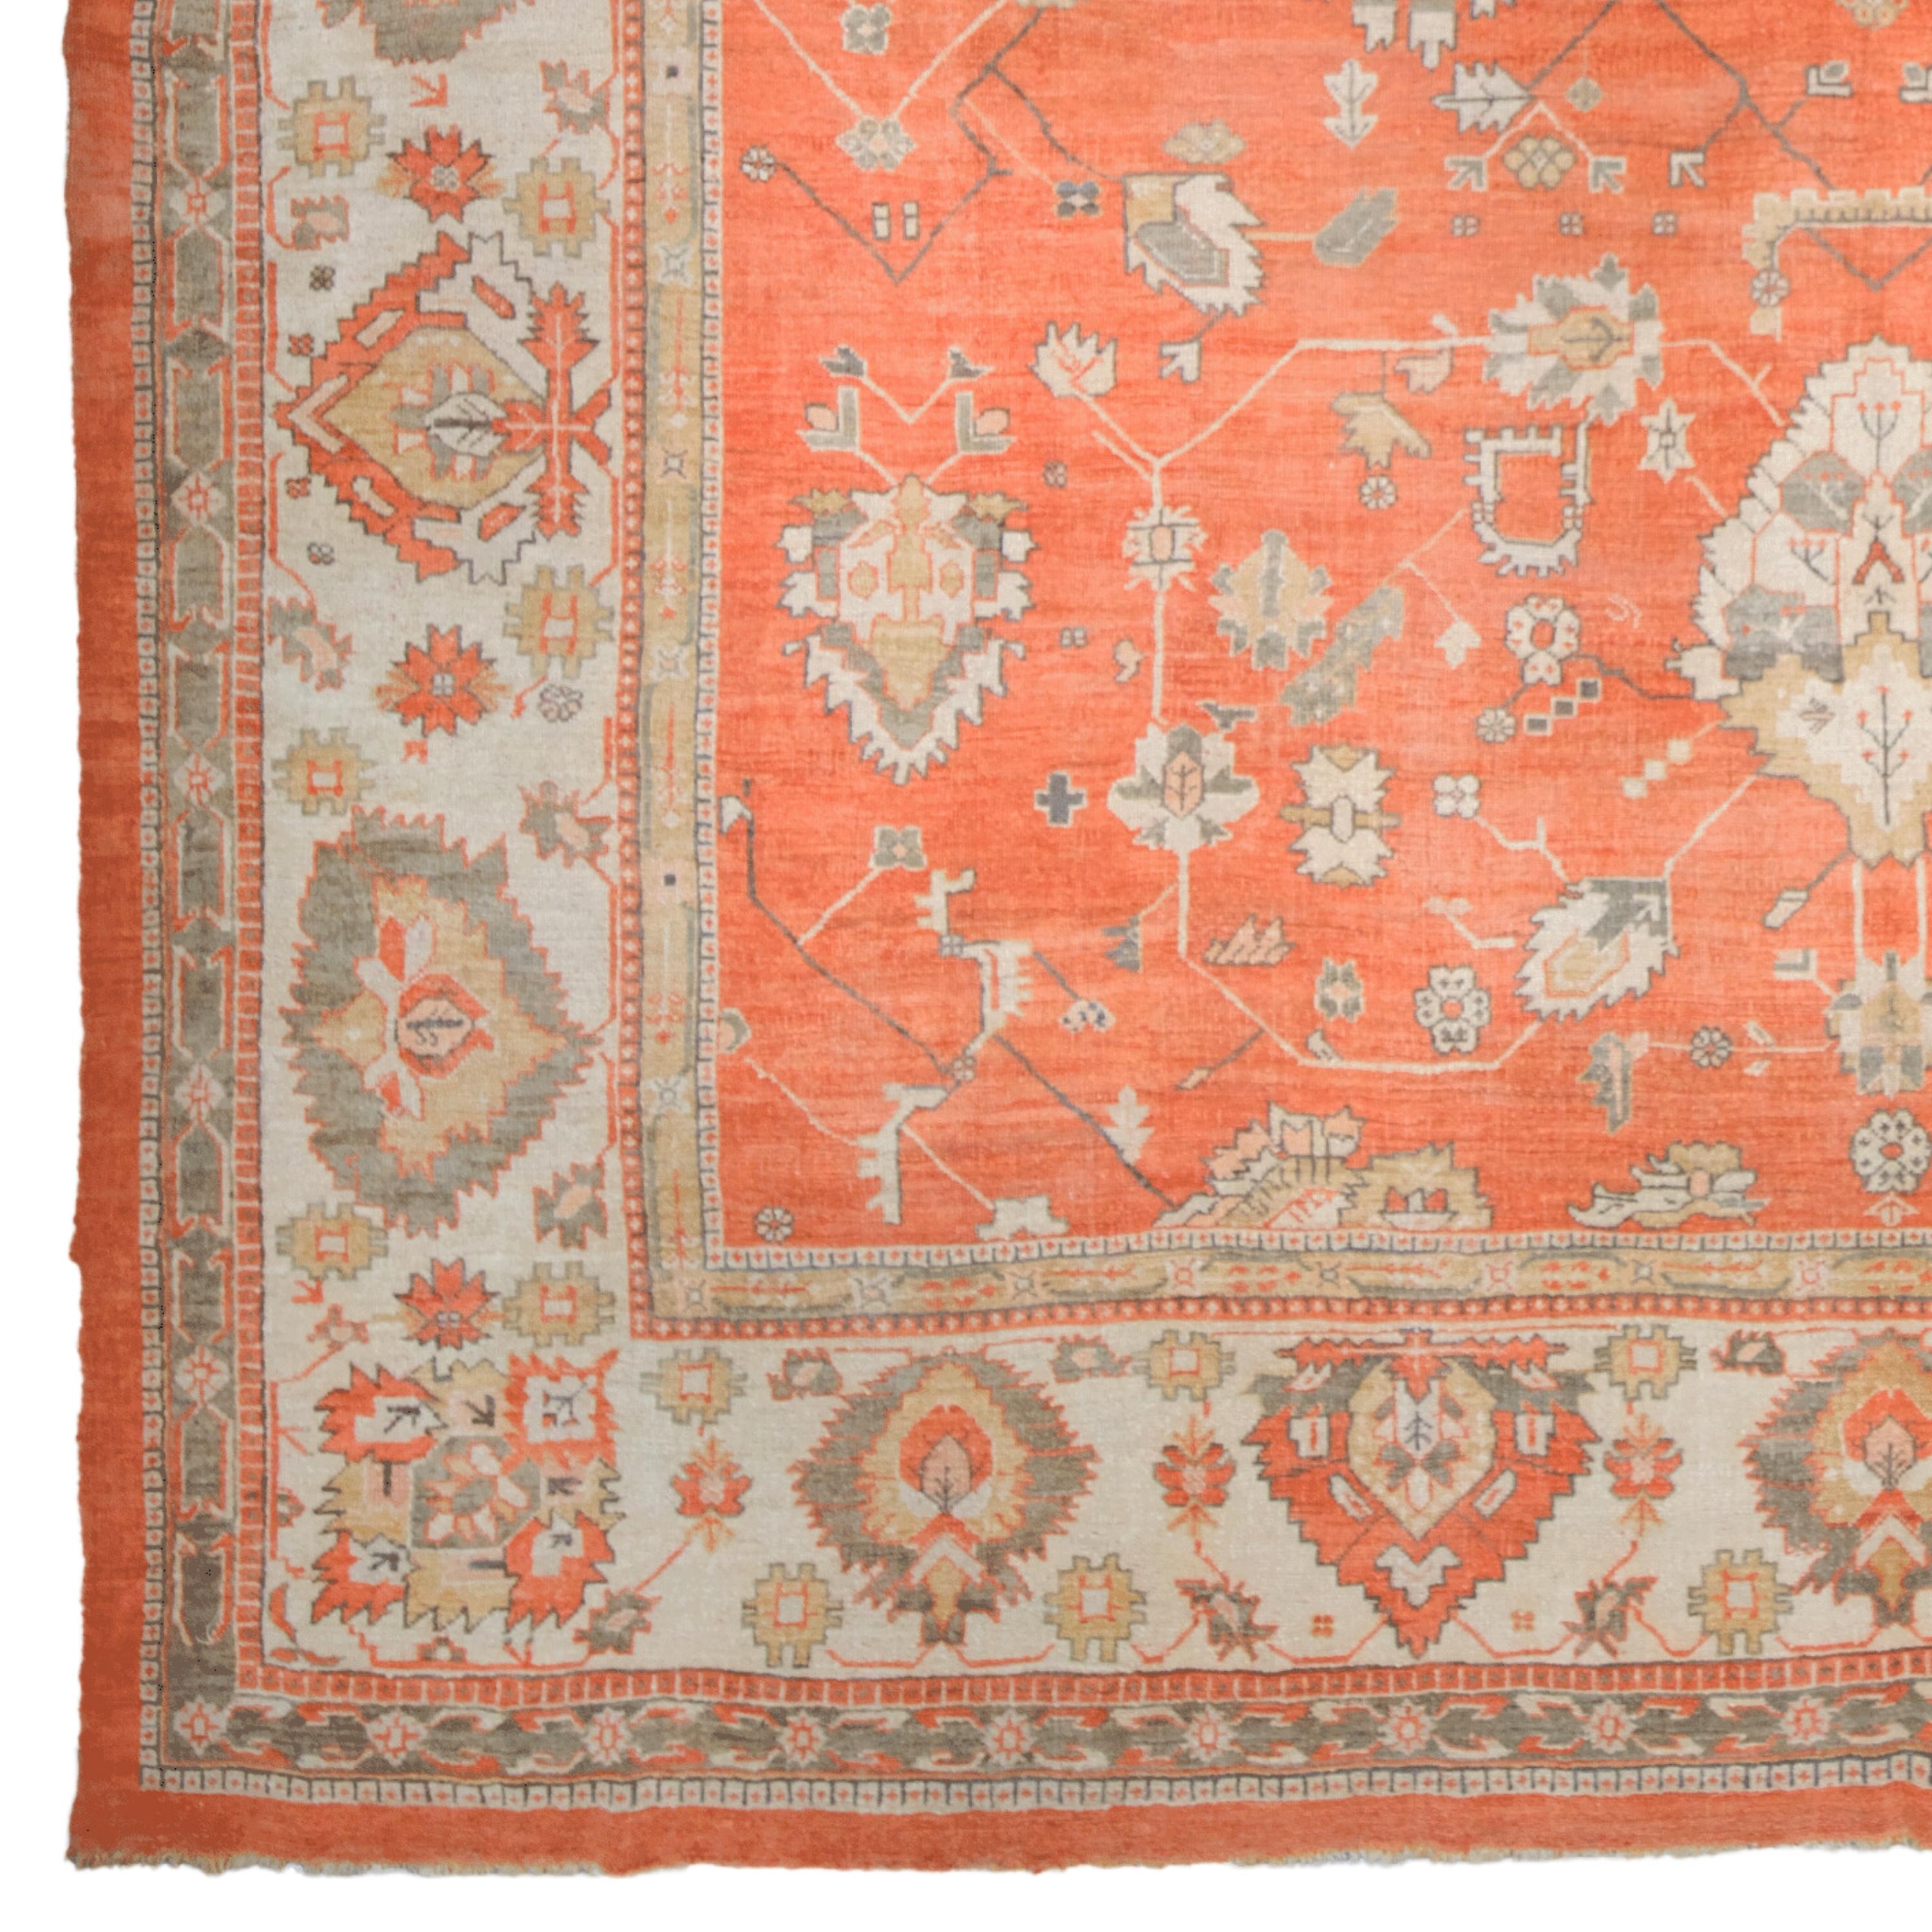 This antique Uşak rug features intricate patterns in light and dark tones on an orange background. The carpet features a central medallion, corner brackets and an ornate border with repeating geometric patterns and floral motifs, making it a